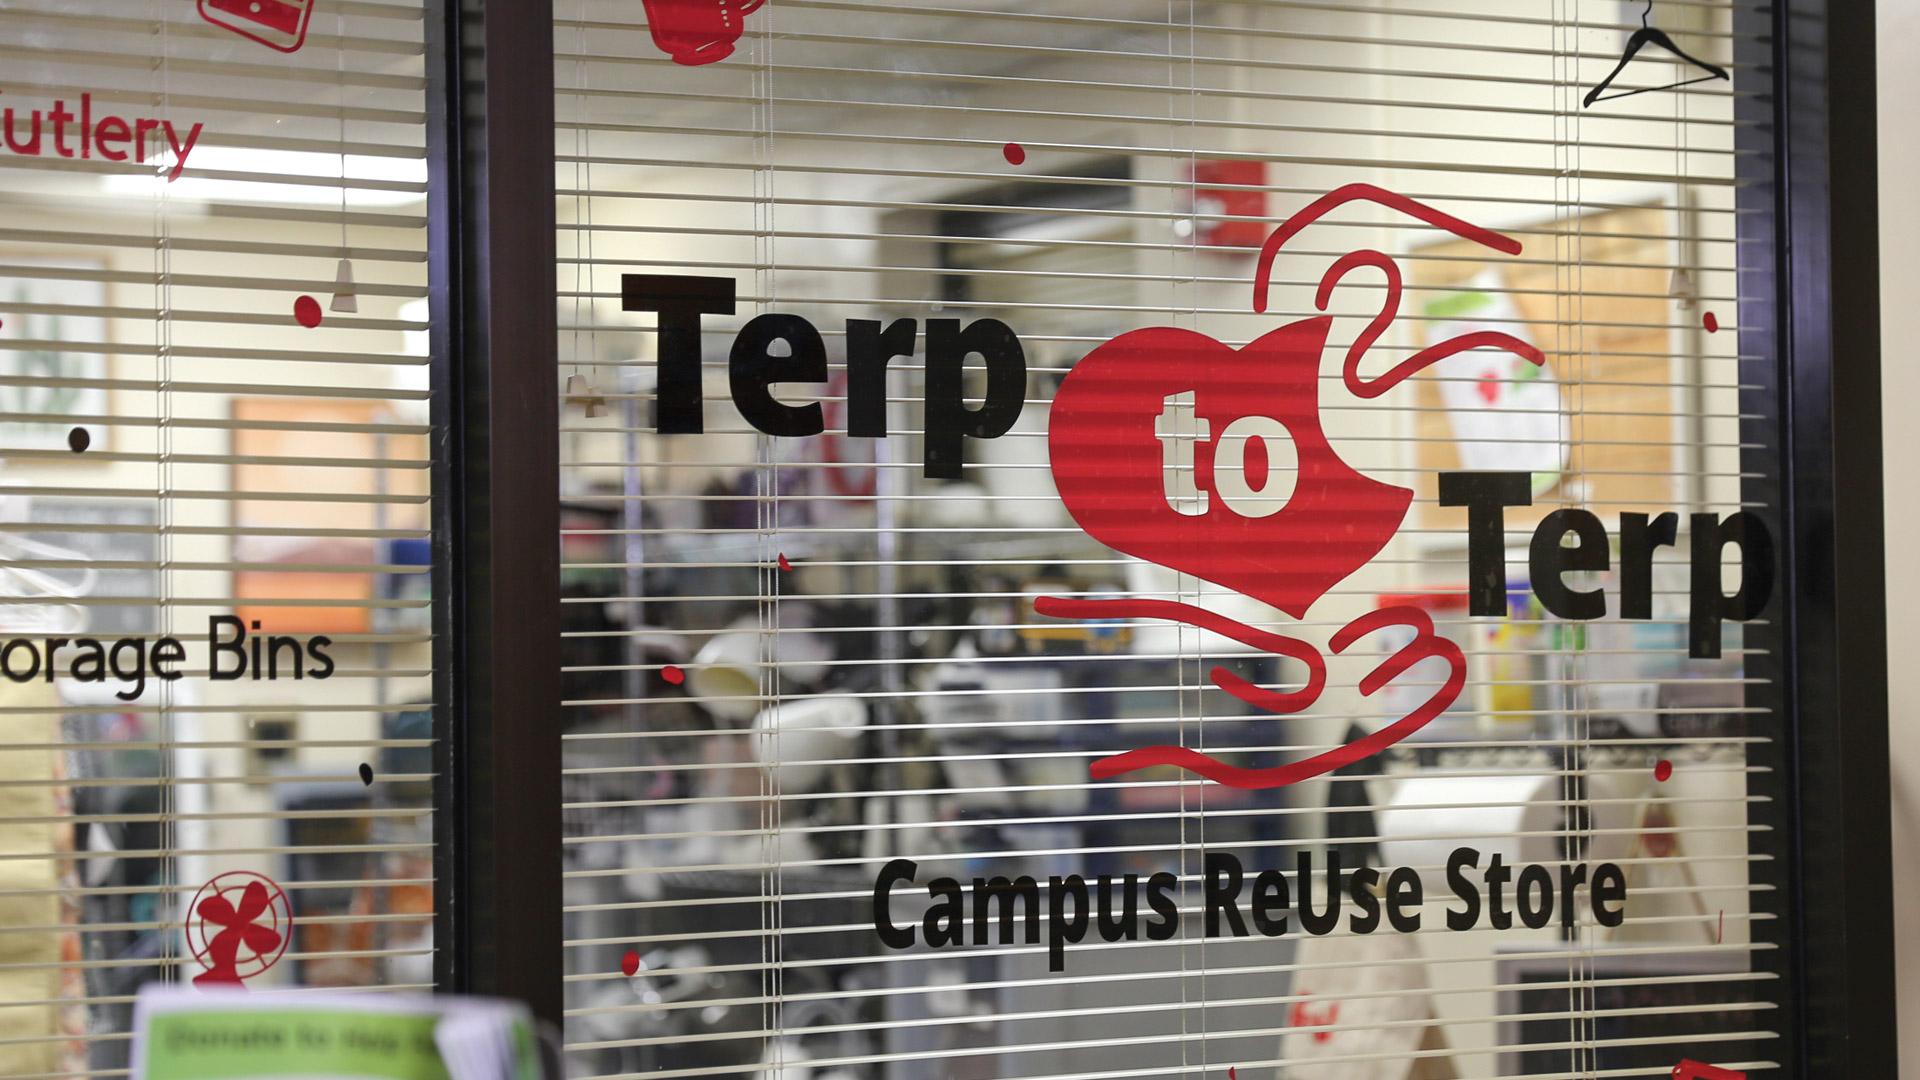 Terp to Terp Campus ReUse Store